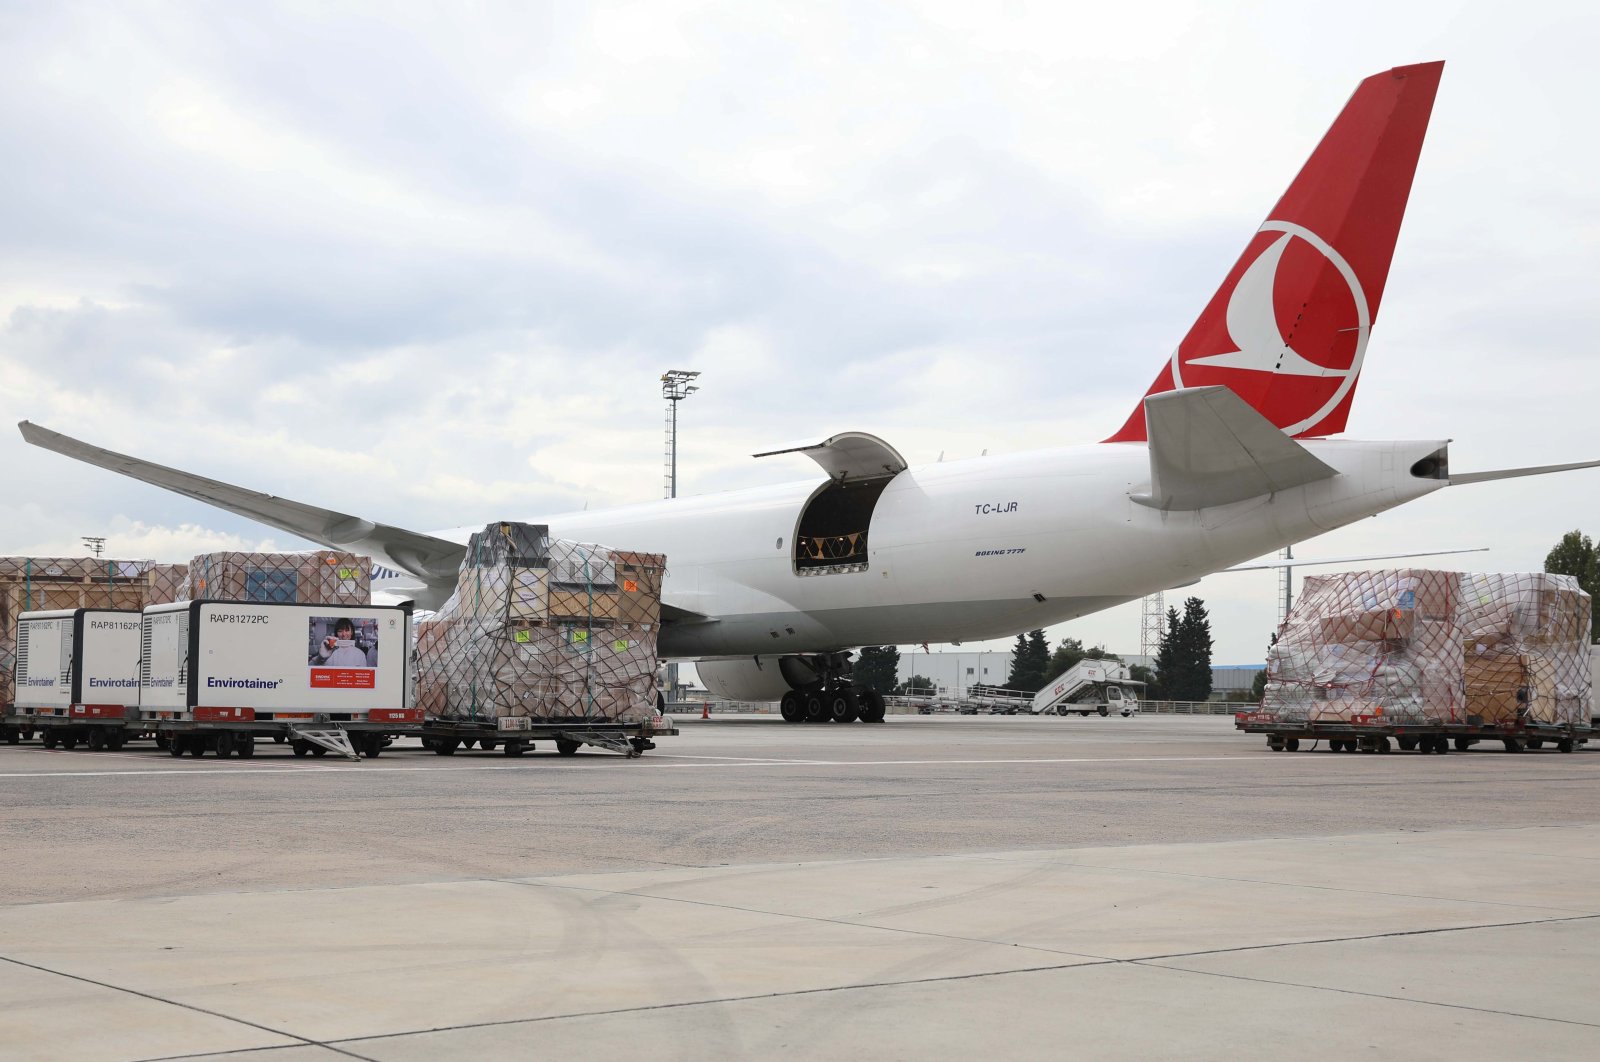 A Turkish Cargo plane is loaded with containers at Istanbul Airport, Istanbul, Turkey, Nov. 18, 2020. (Photo by Turkish Airlines via Reuters )